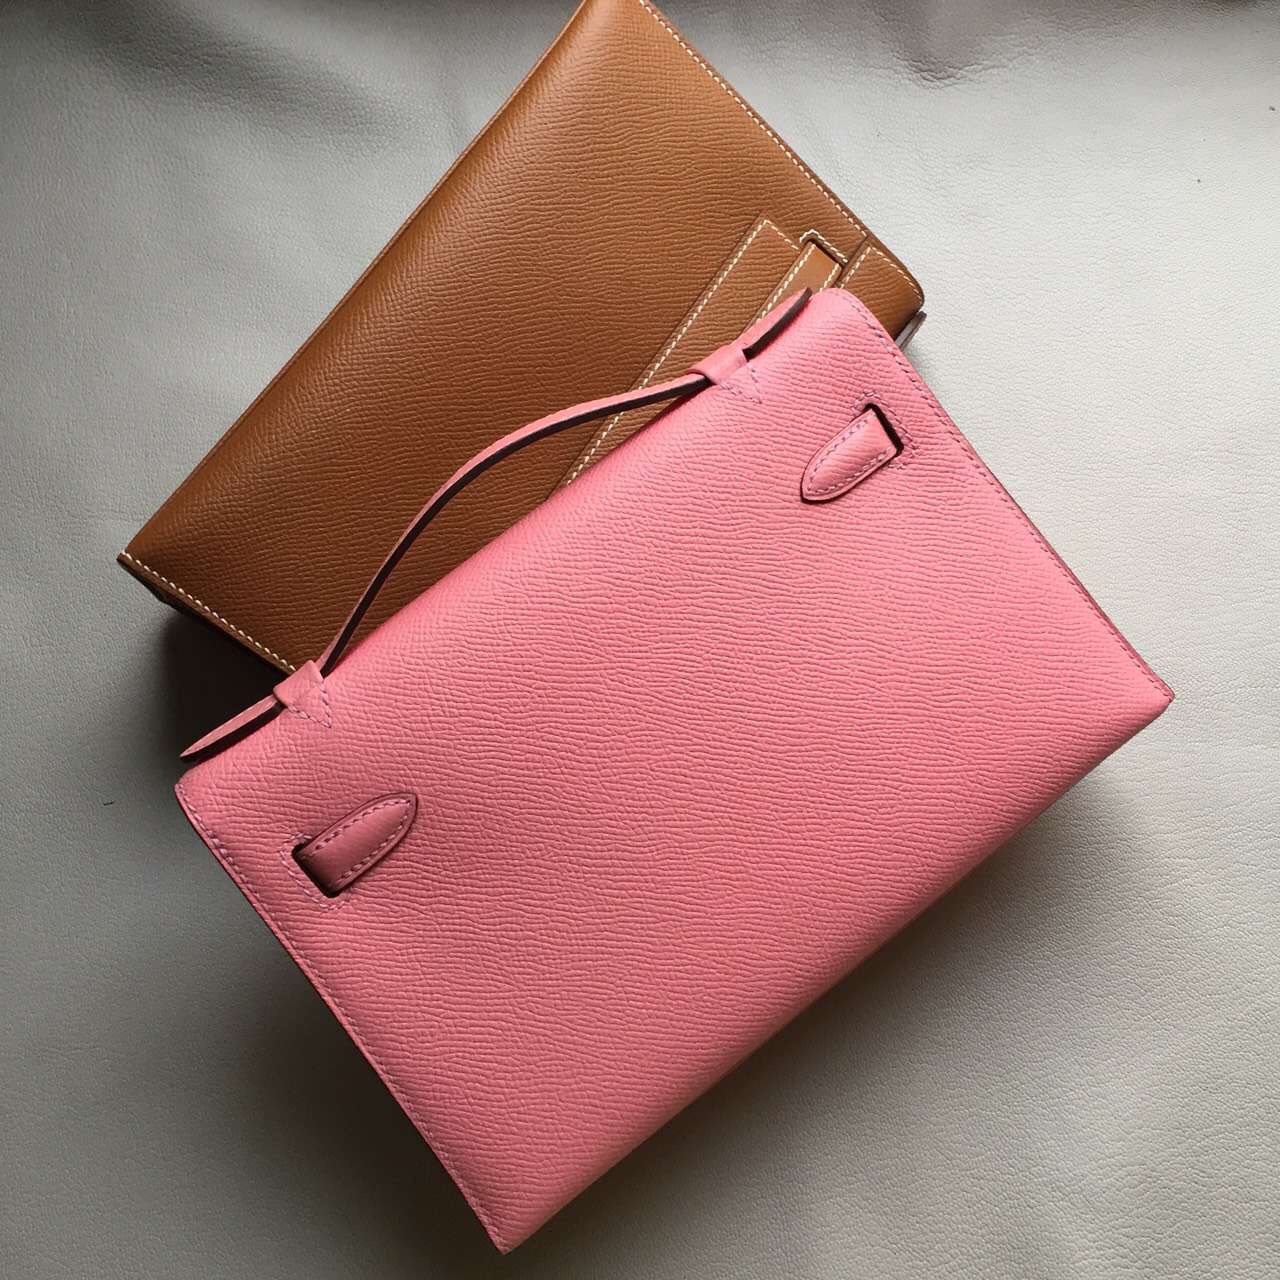 Hand Stitching Hermes Epsom Leather Minikelly Bag22CM 1Q Rose Confetti